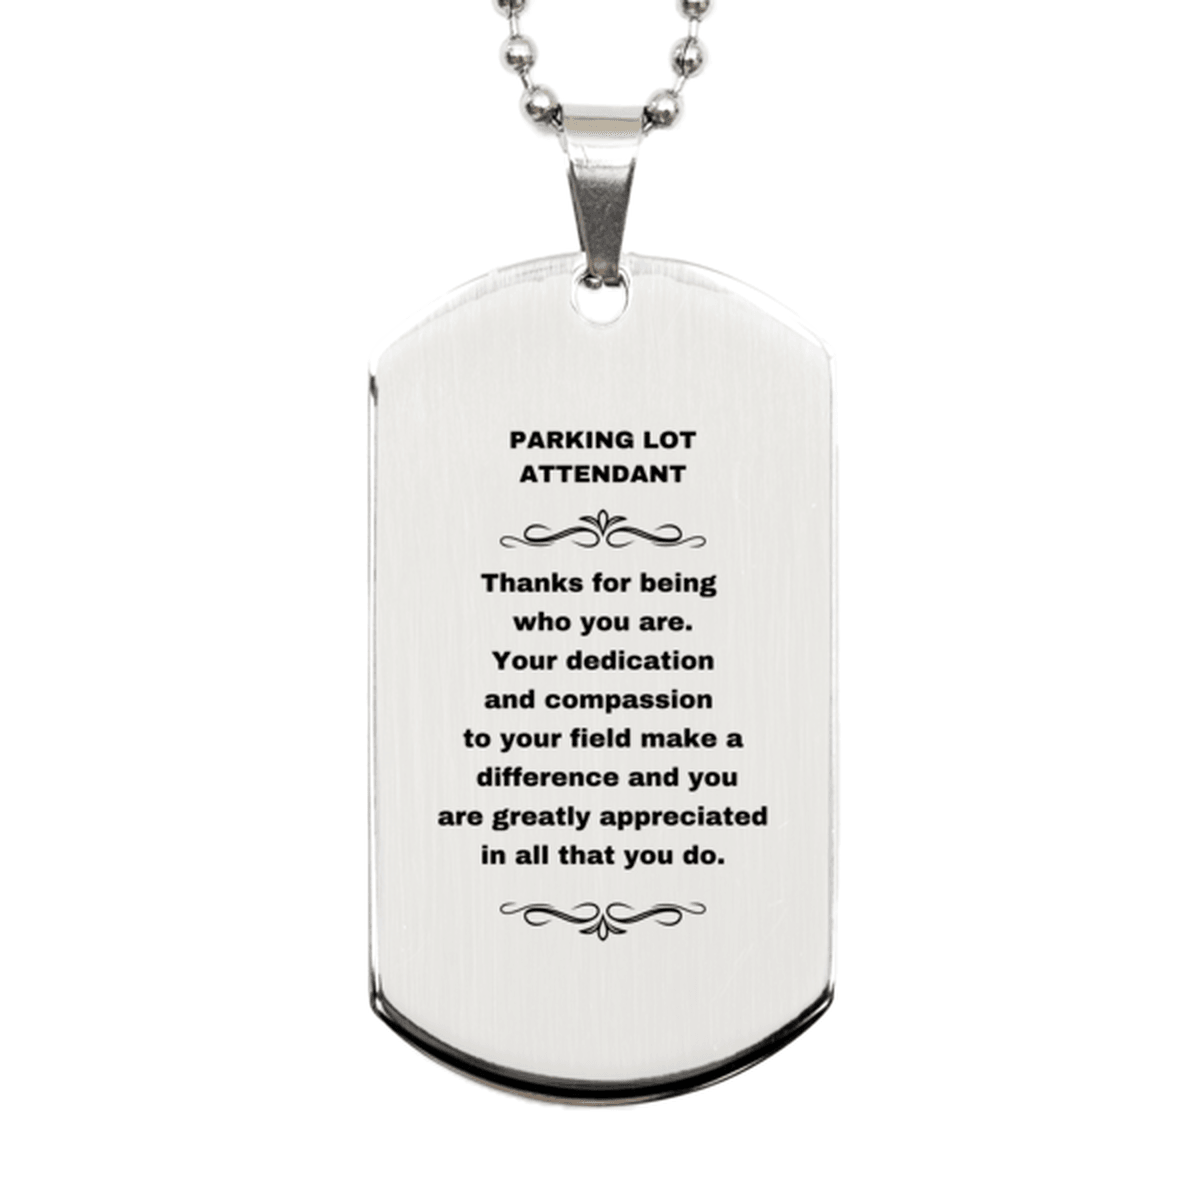 Parking Lot Attendant Silver Dog Tag Engraved Necklace - Thanks for being who you are - Birthday Christmas Jewelry Gifts Coworkers Colleague Boss - Mallard Moon Gift Shop